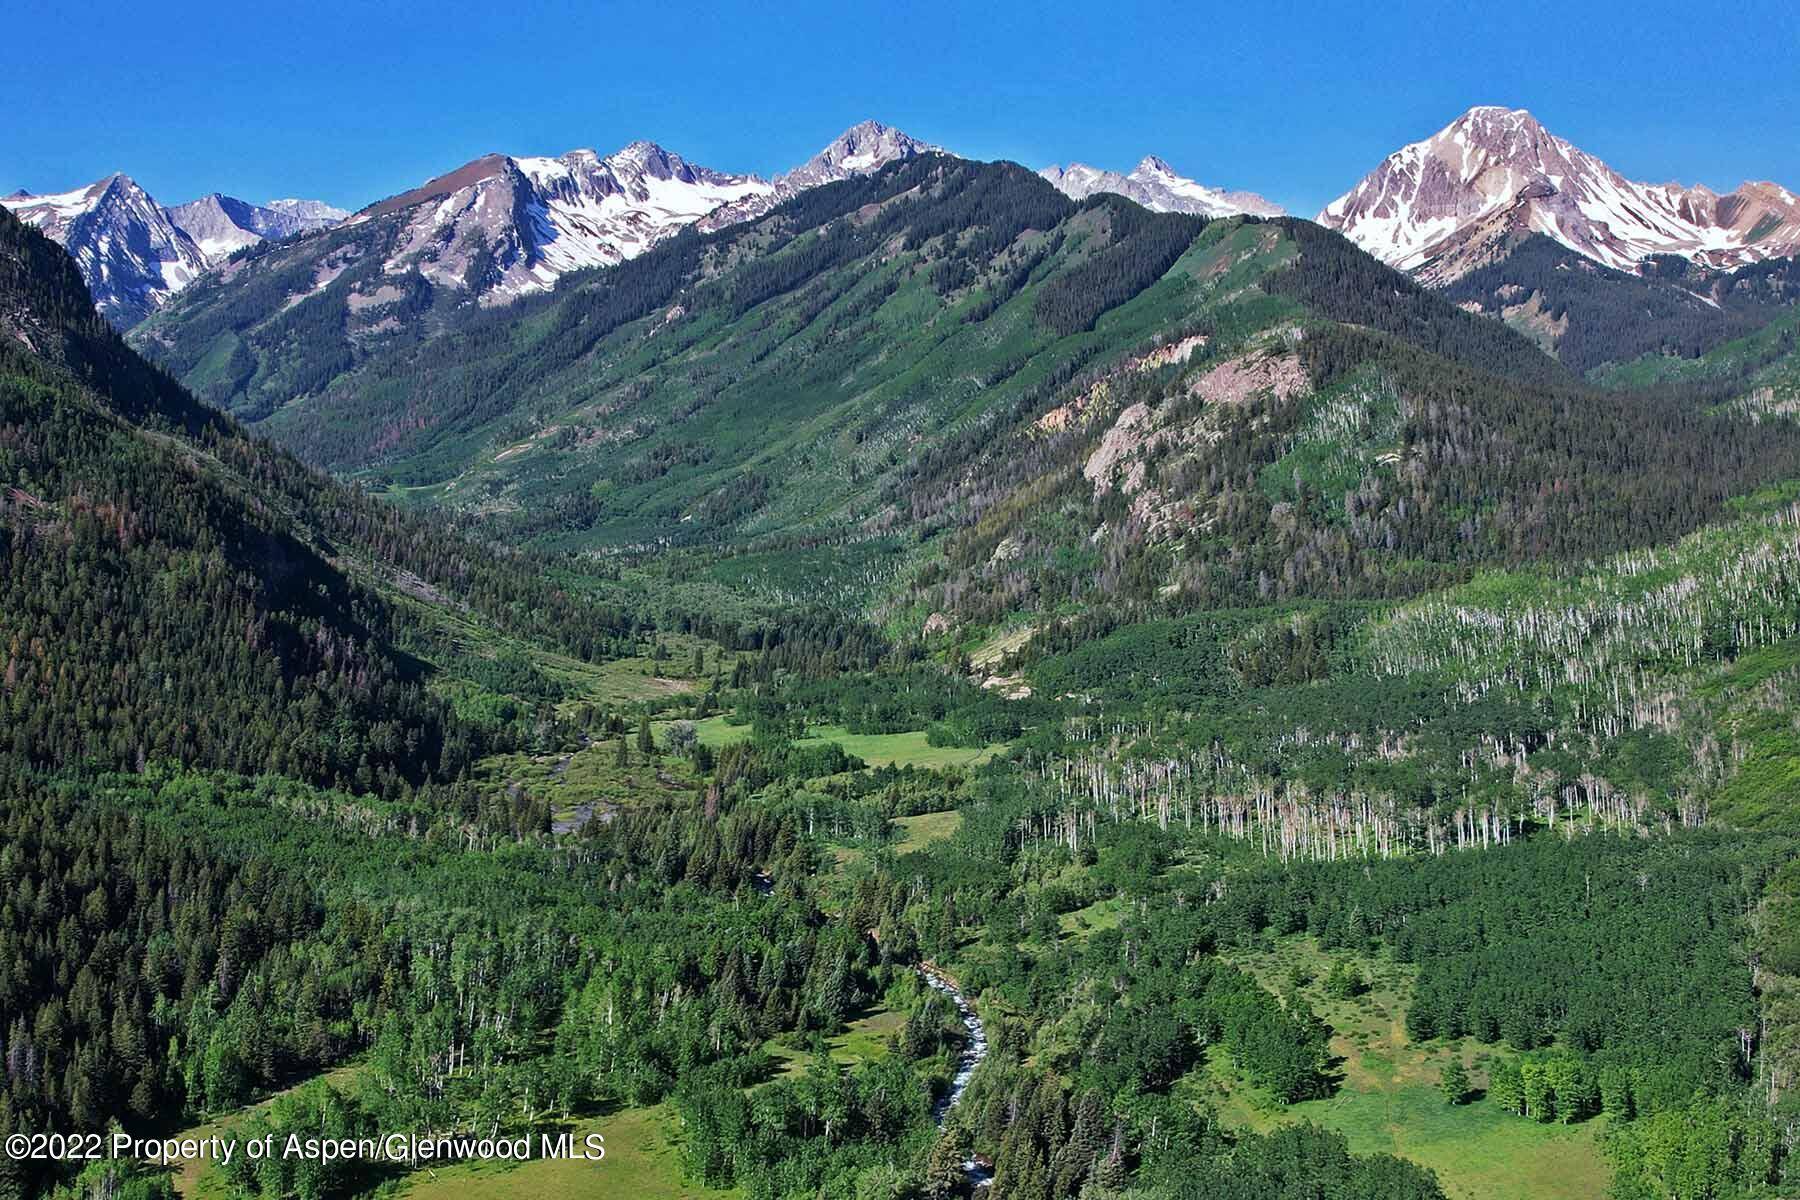 Encompassing a picturesque mountain valley nestled at the base of towering peaks, Snowmass Falls Ranch offers the ultimate combination of natural beauty, seclusion, and access to world class amenities.